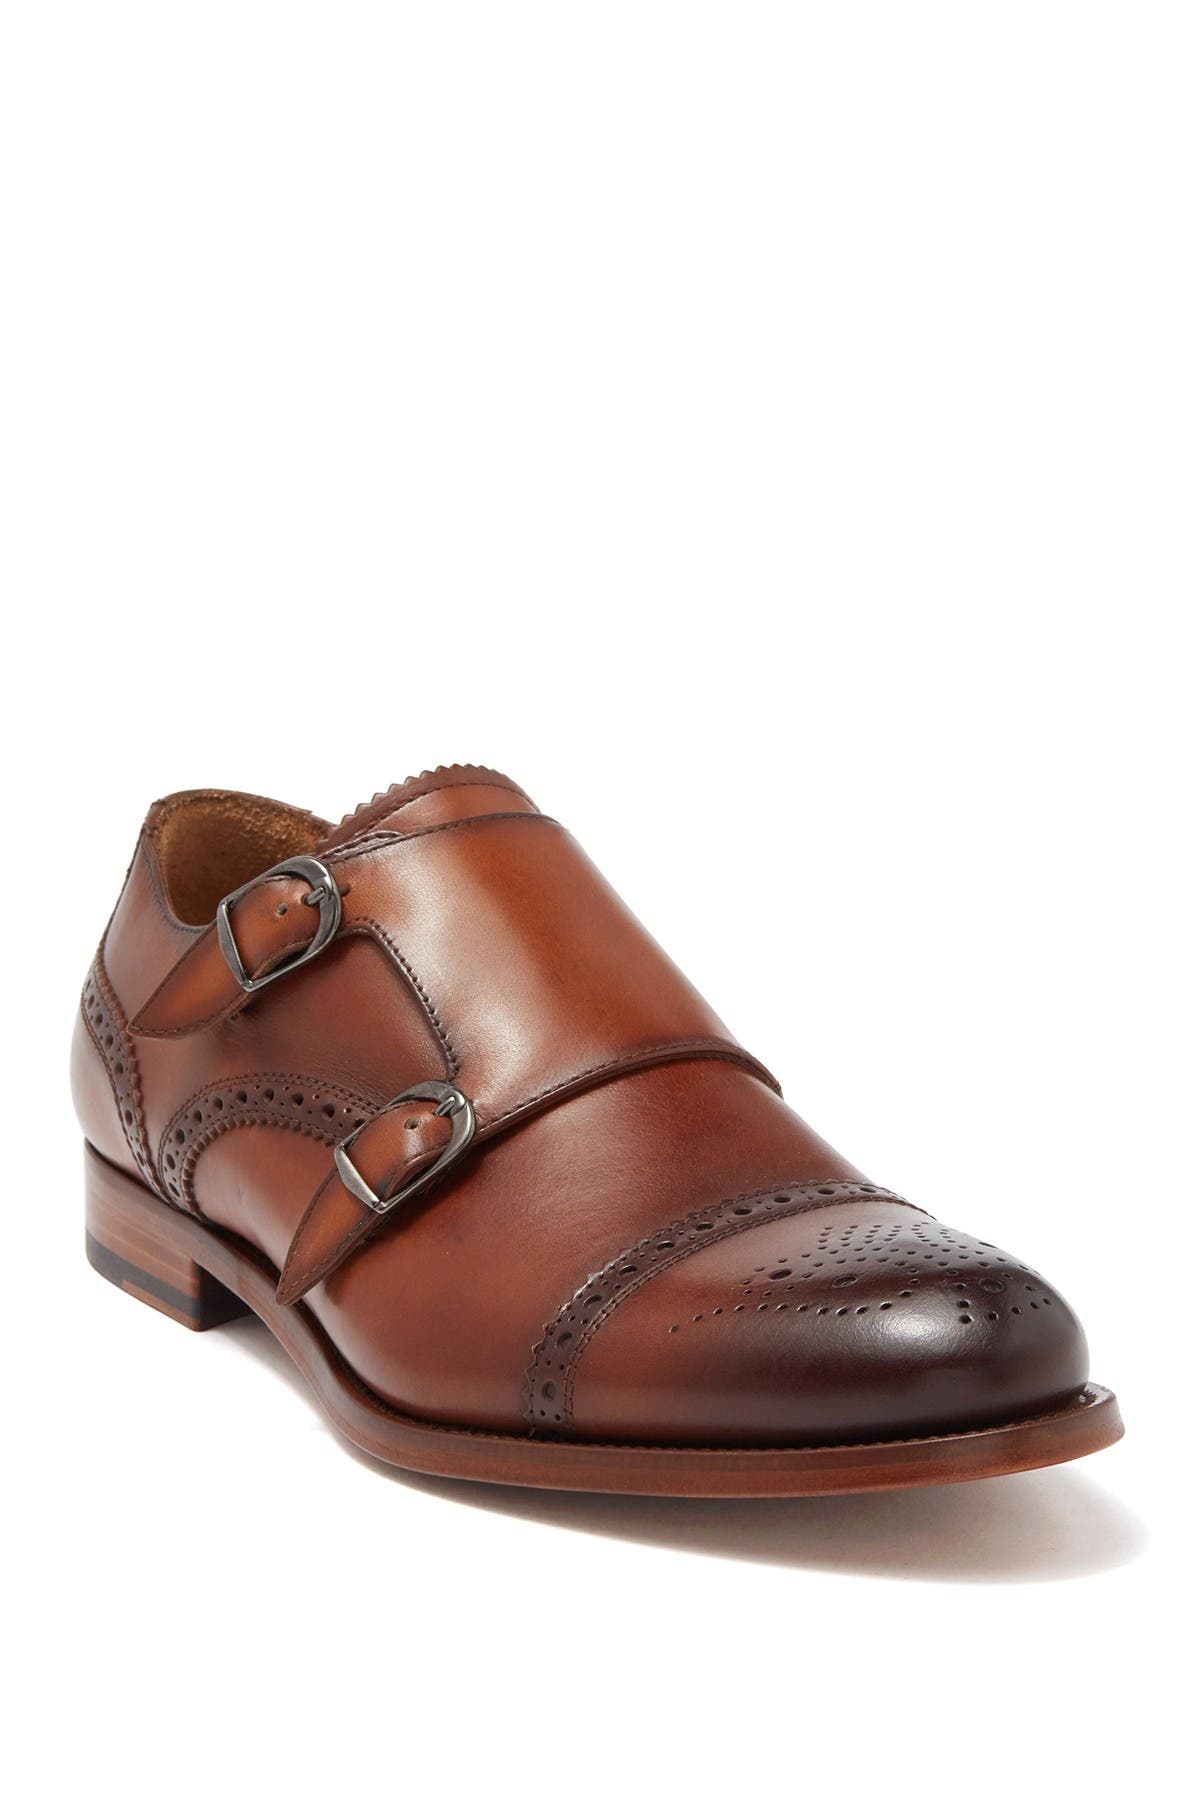 nordstrom rack mens shoes clearance